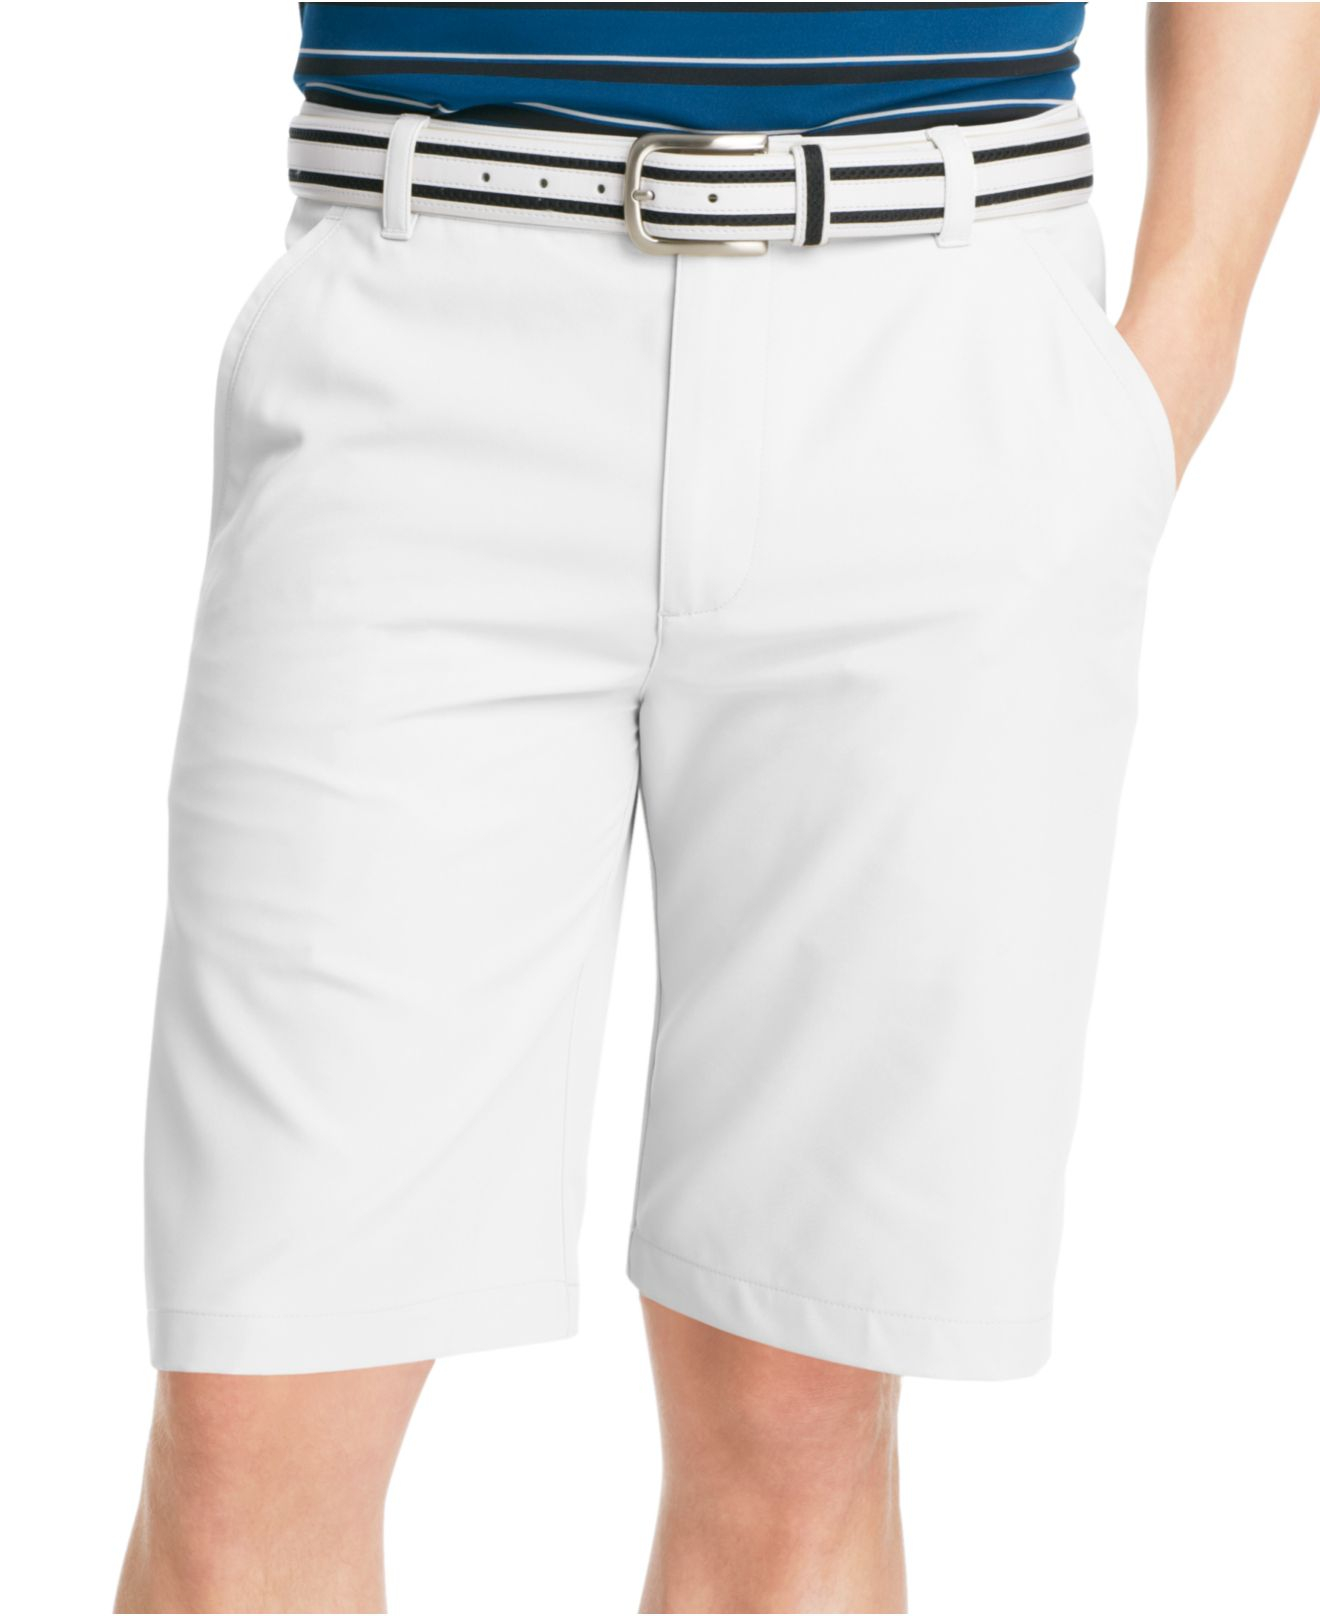 Lyst - Izod Flat-Front Classic Micro-Twill Performance Shorts in White ...